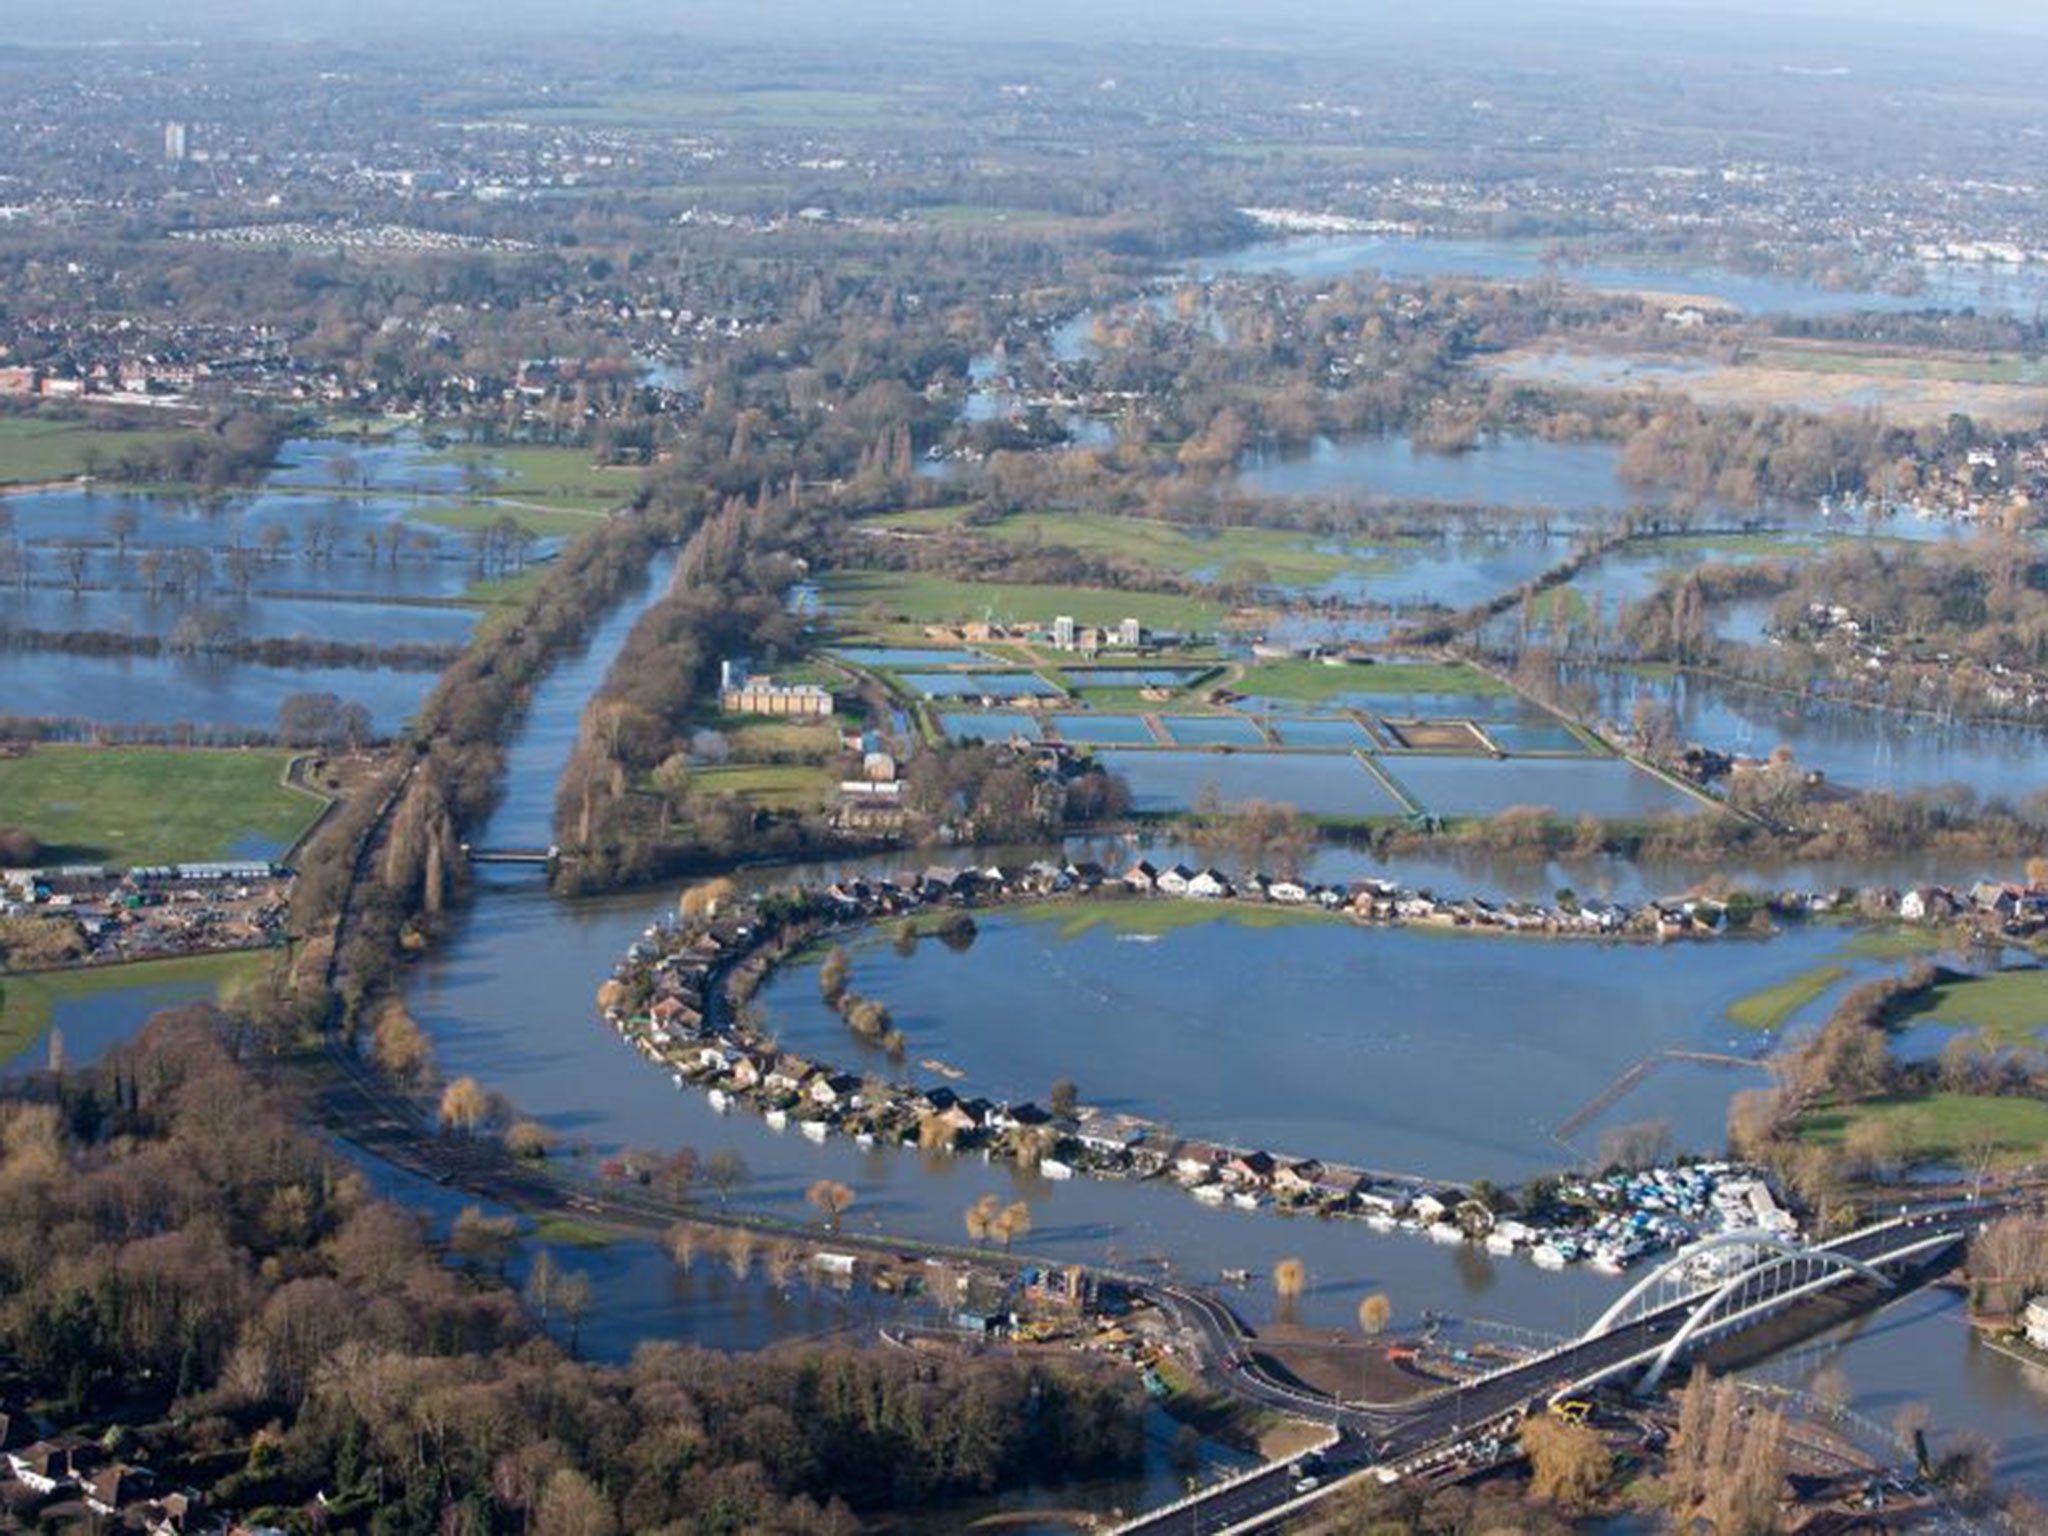 MPs argued maintaining flood protection for vulnerable communities such as Walton-on-Thames, pictured, should take priority over cost-cutting 